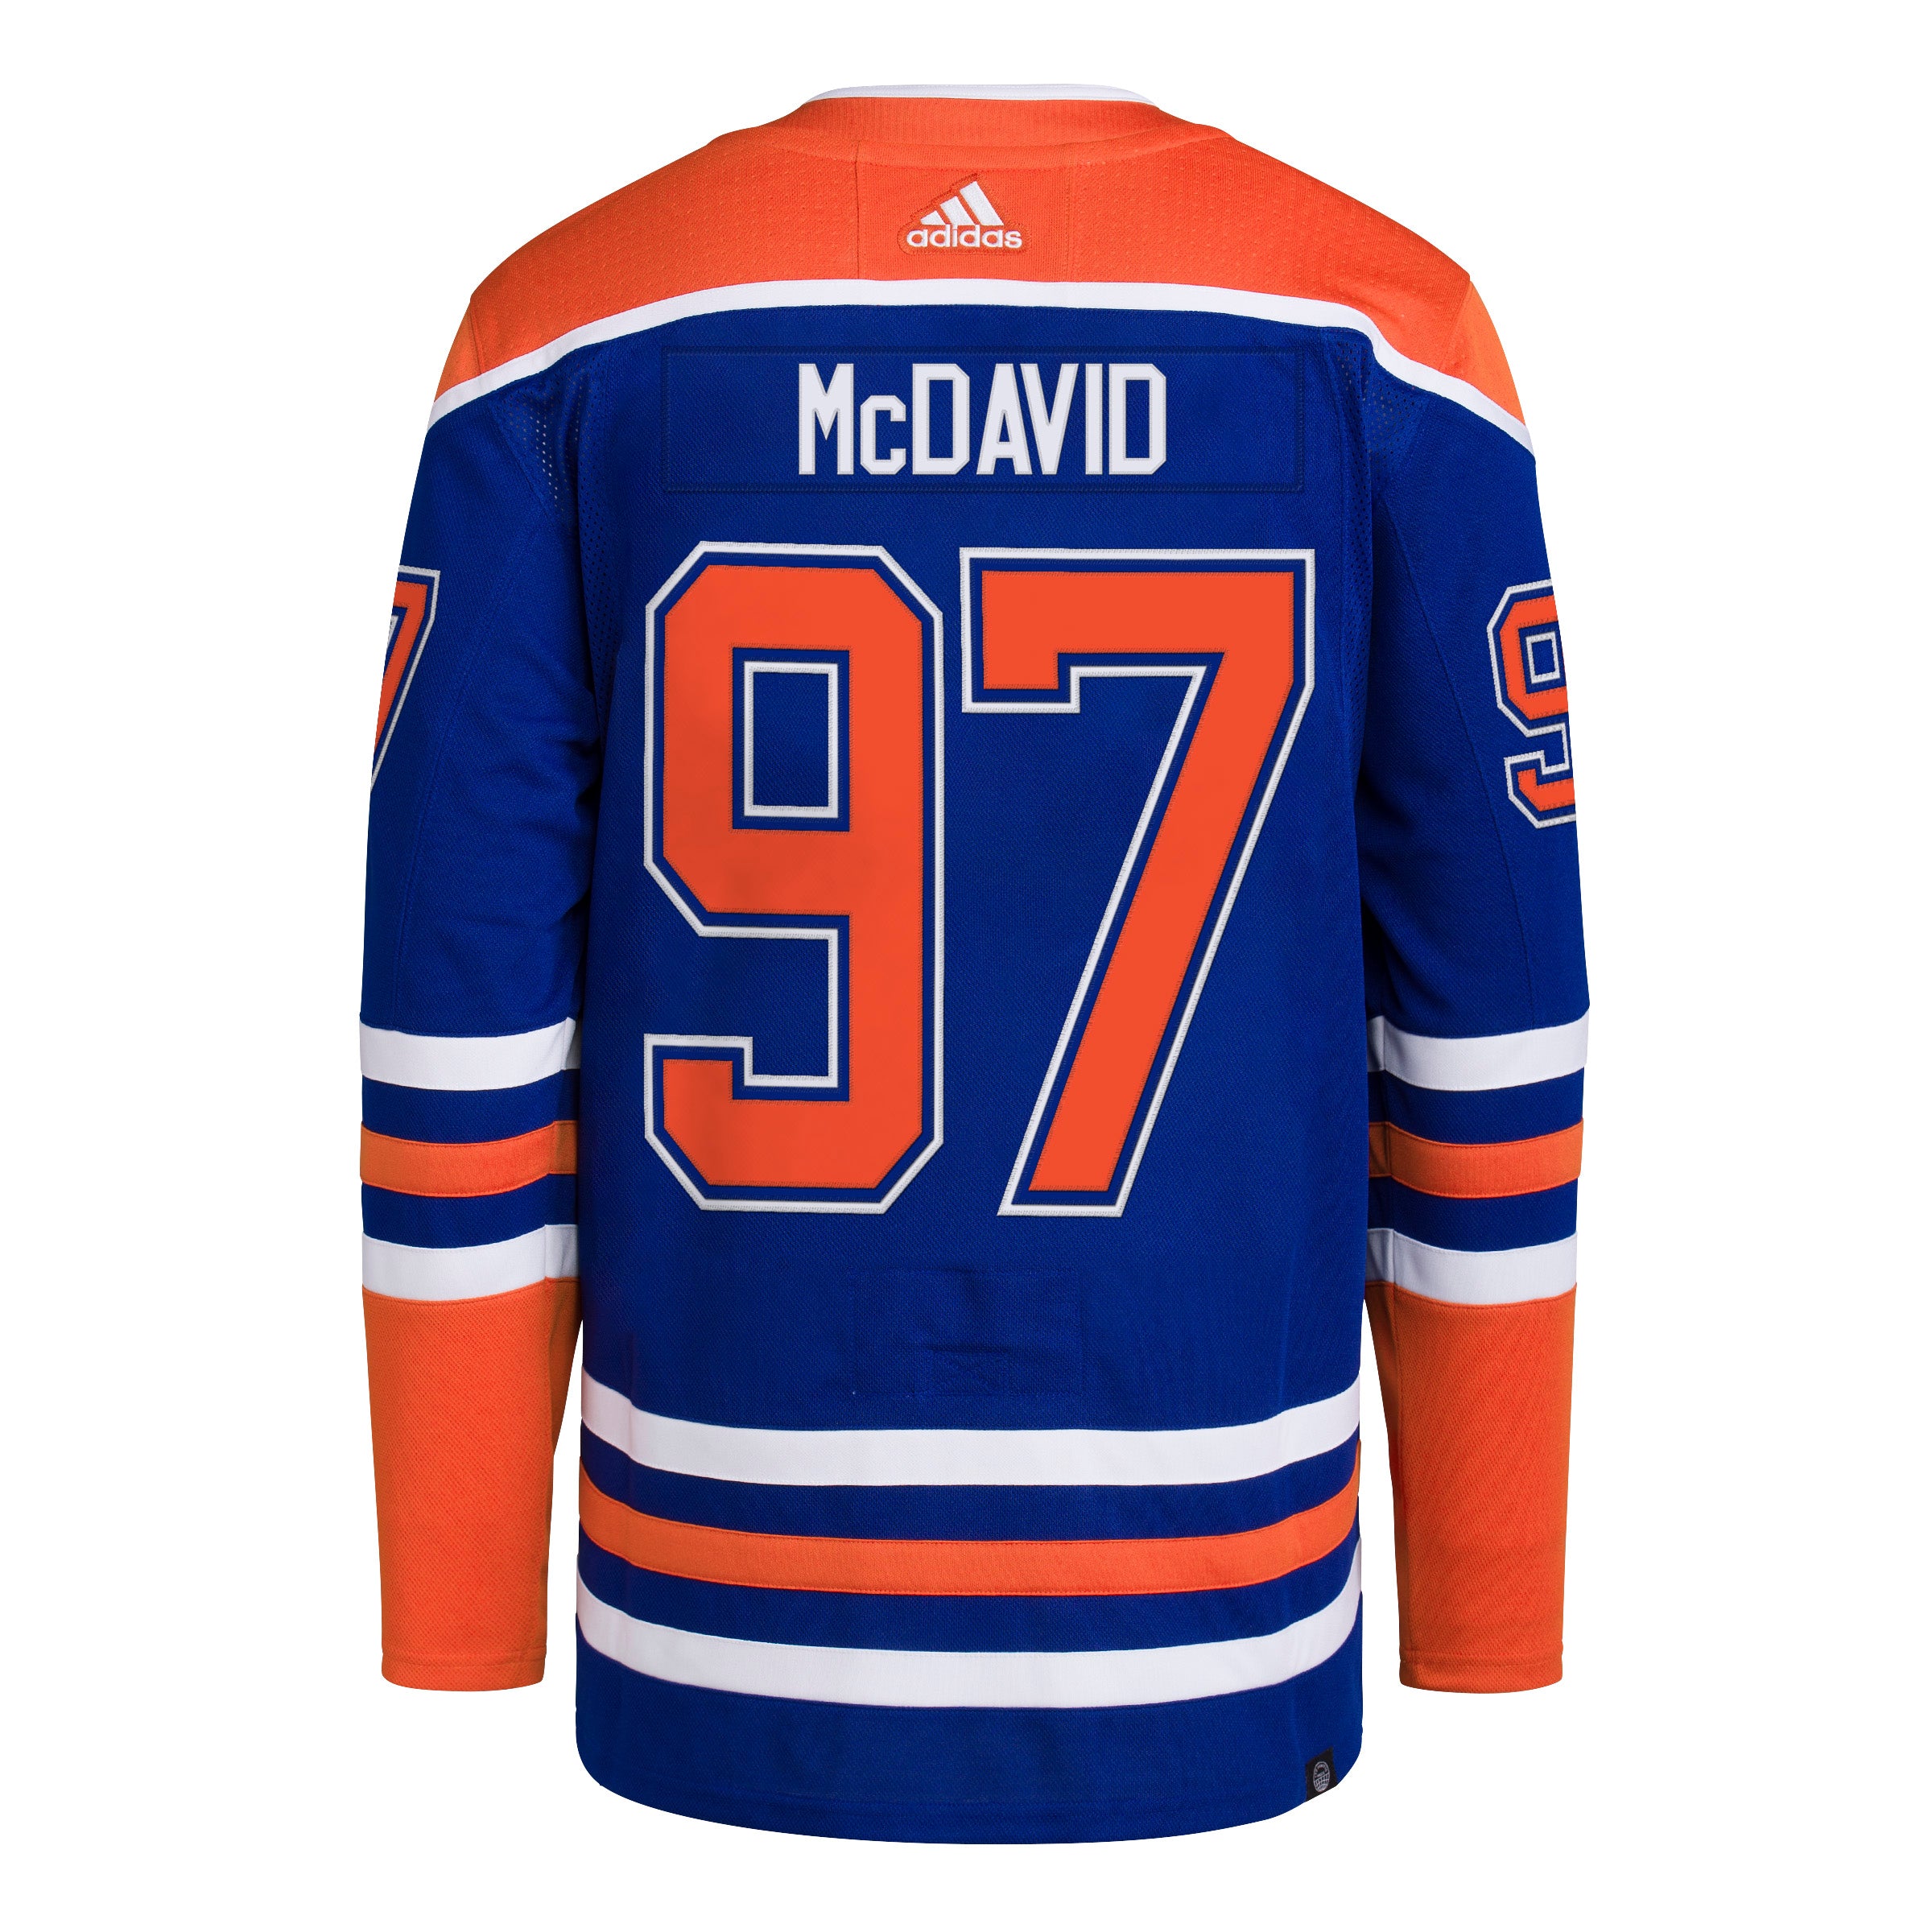 Mail Day this week. Connor McDavid Adidas Authentic Pro Edmonton